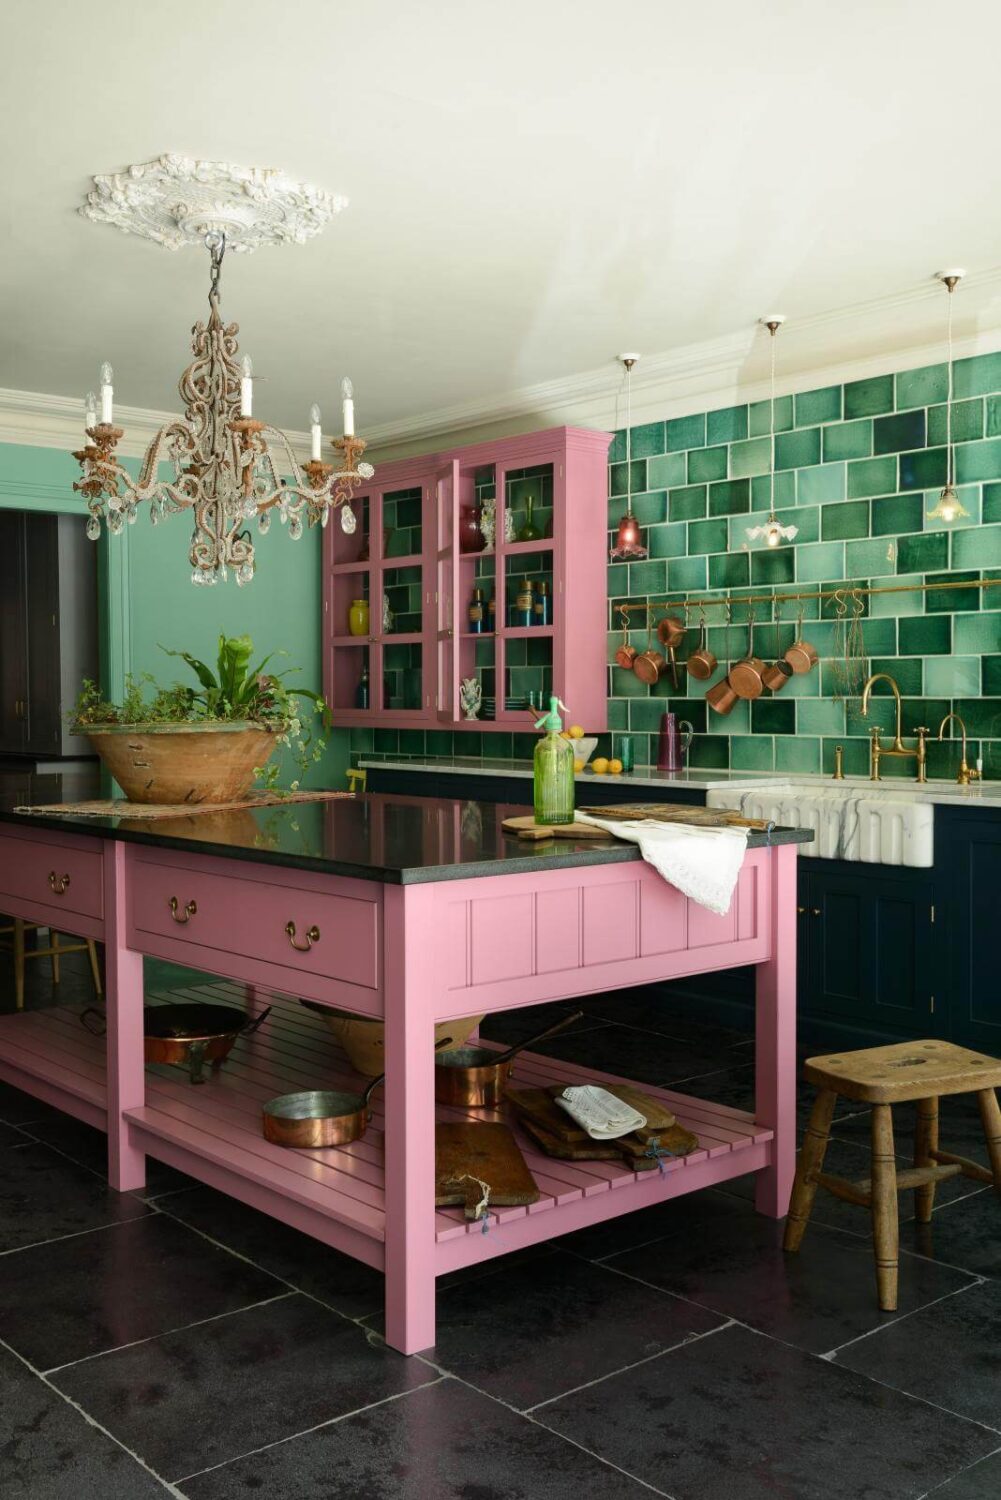 two-tone-cabinets-devol-pink-blue-tiles-green-nordroom